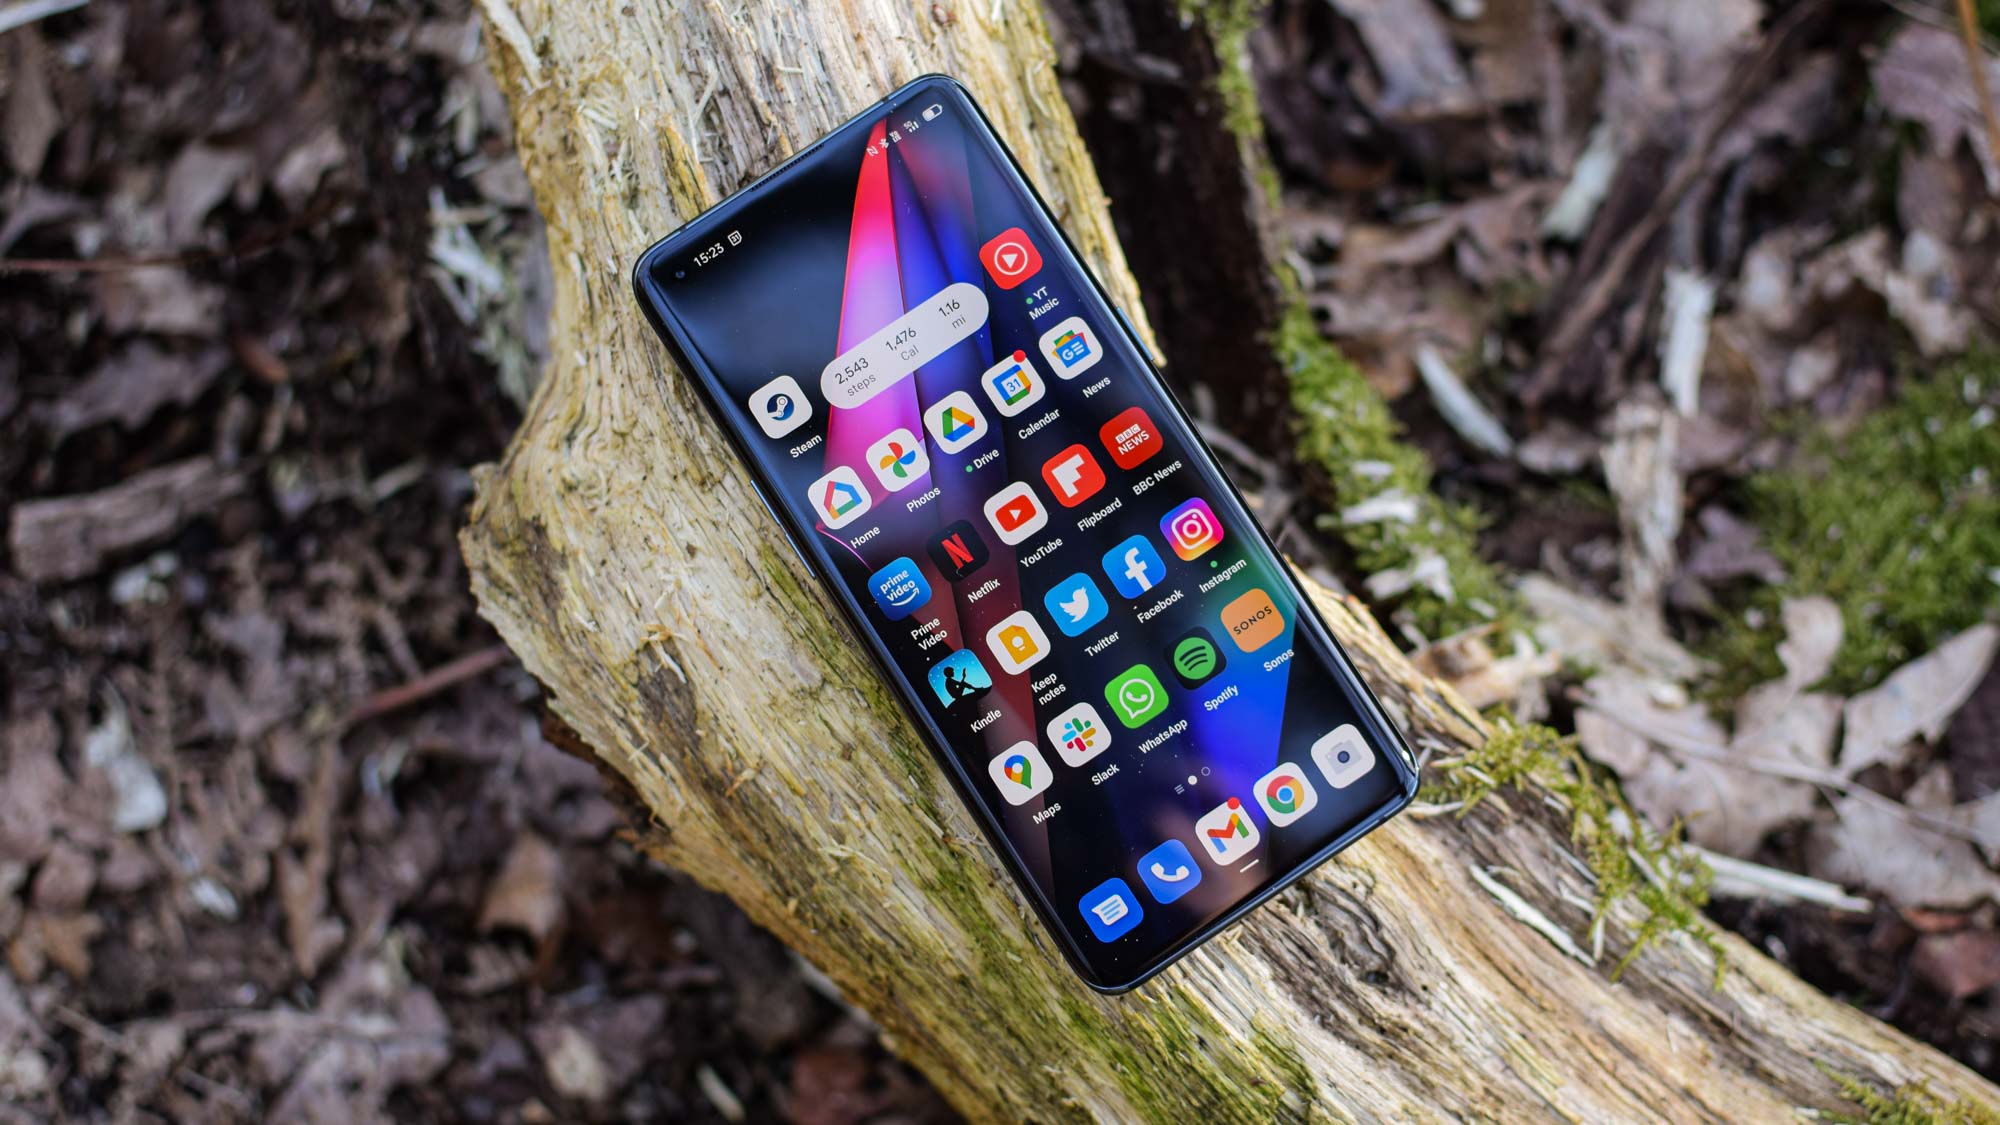 Poco X3 Pro review: Top performance on a budget, but with a few compromises